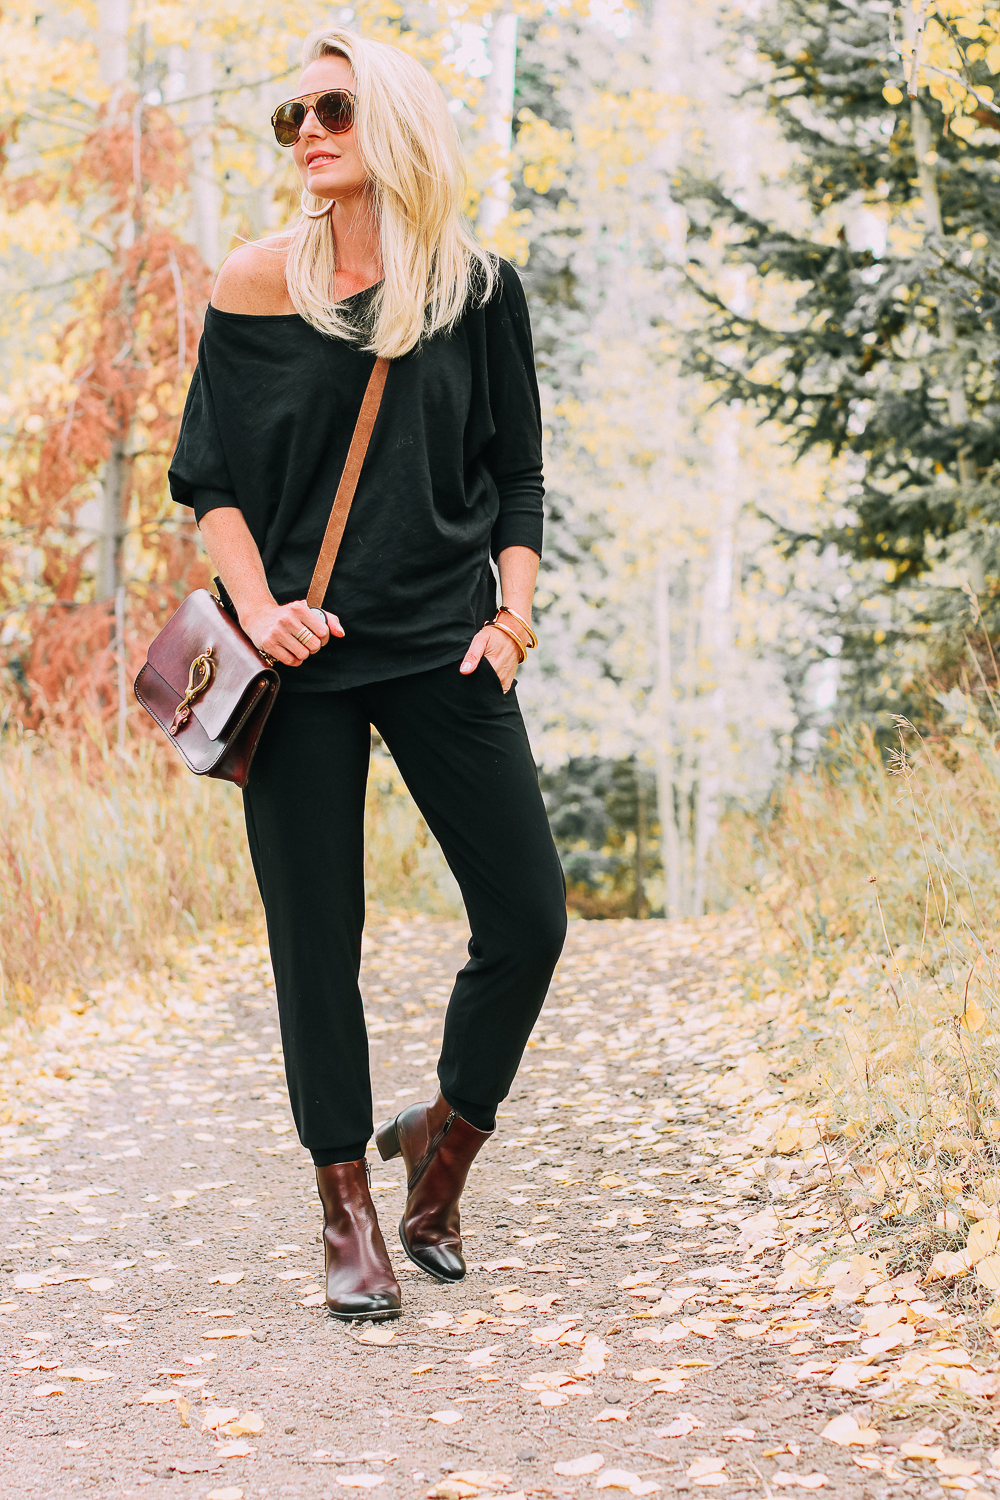 ankle boots for walking in Bison brown with low block heel and comfort, cushion technology by ECCO on fashion blogger in black joggers by Norma Kamali and black off shoulder top with brown crossbody bag